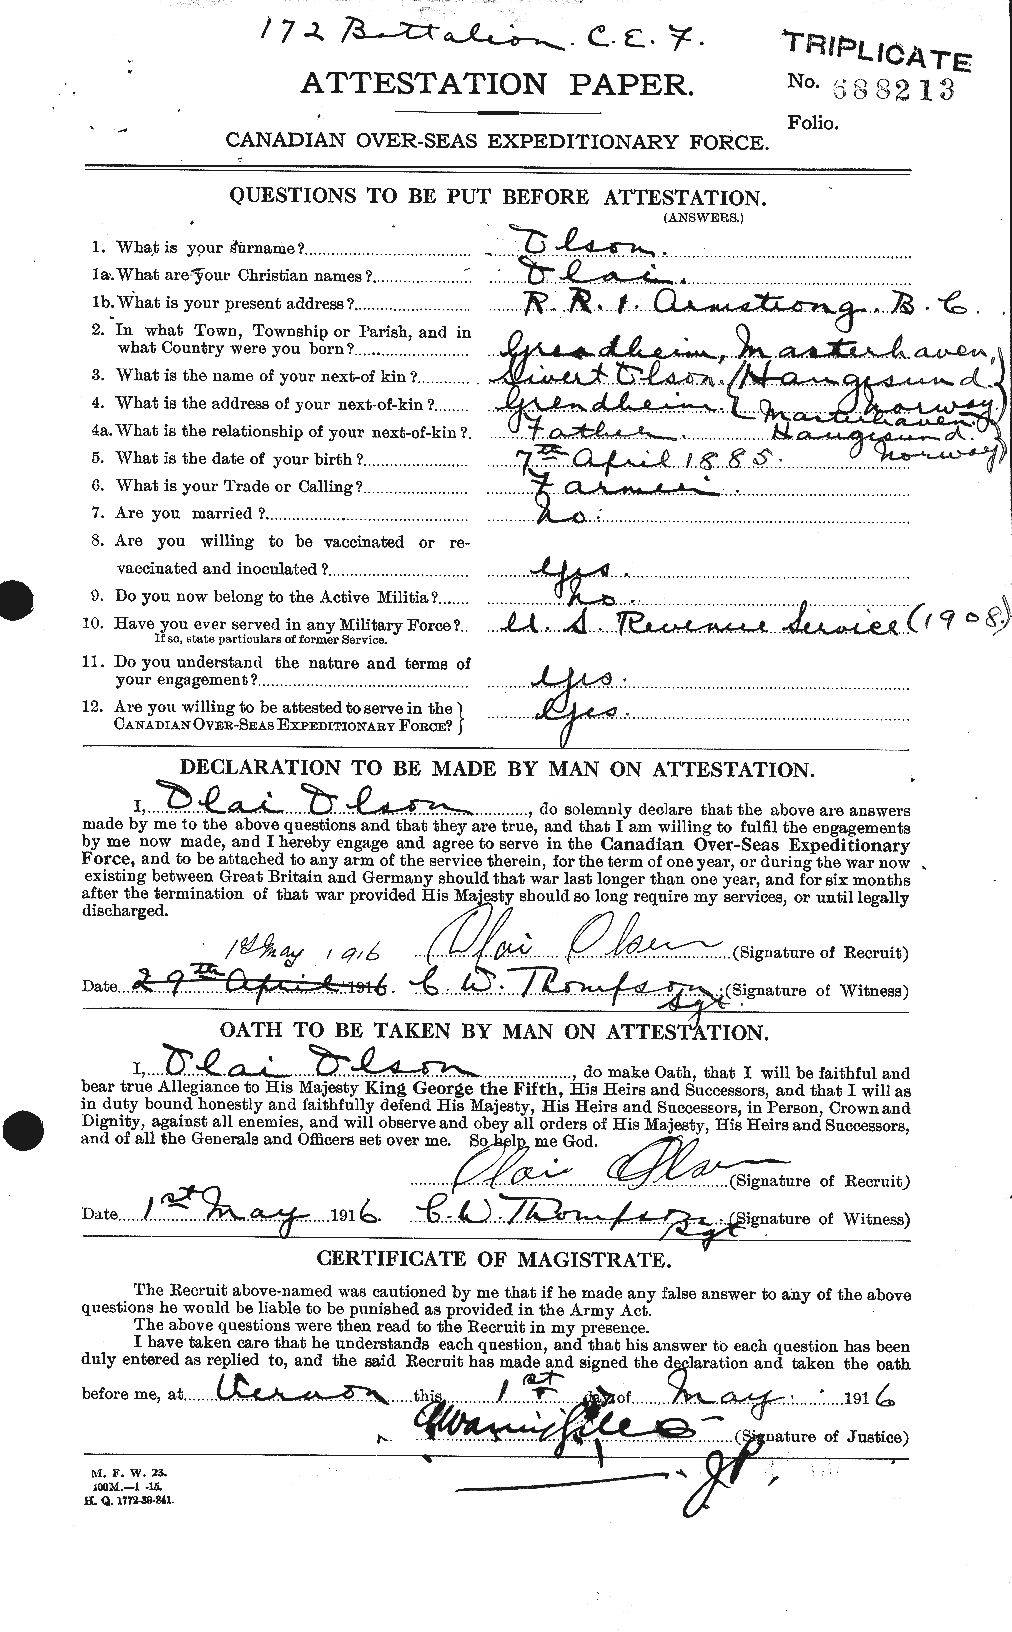 Personnel Records of the First World War - CEF 557273a